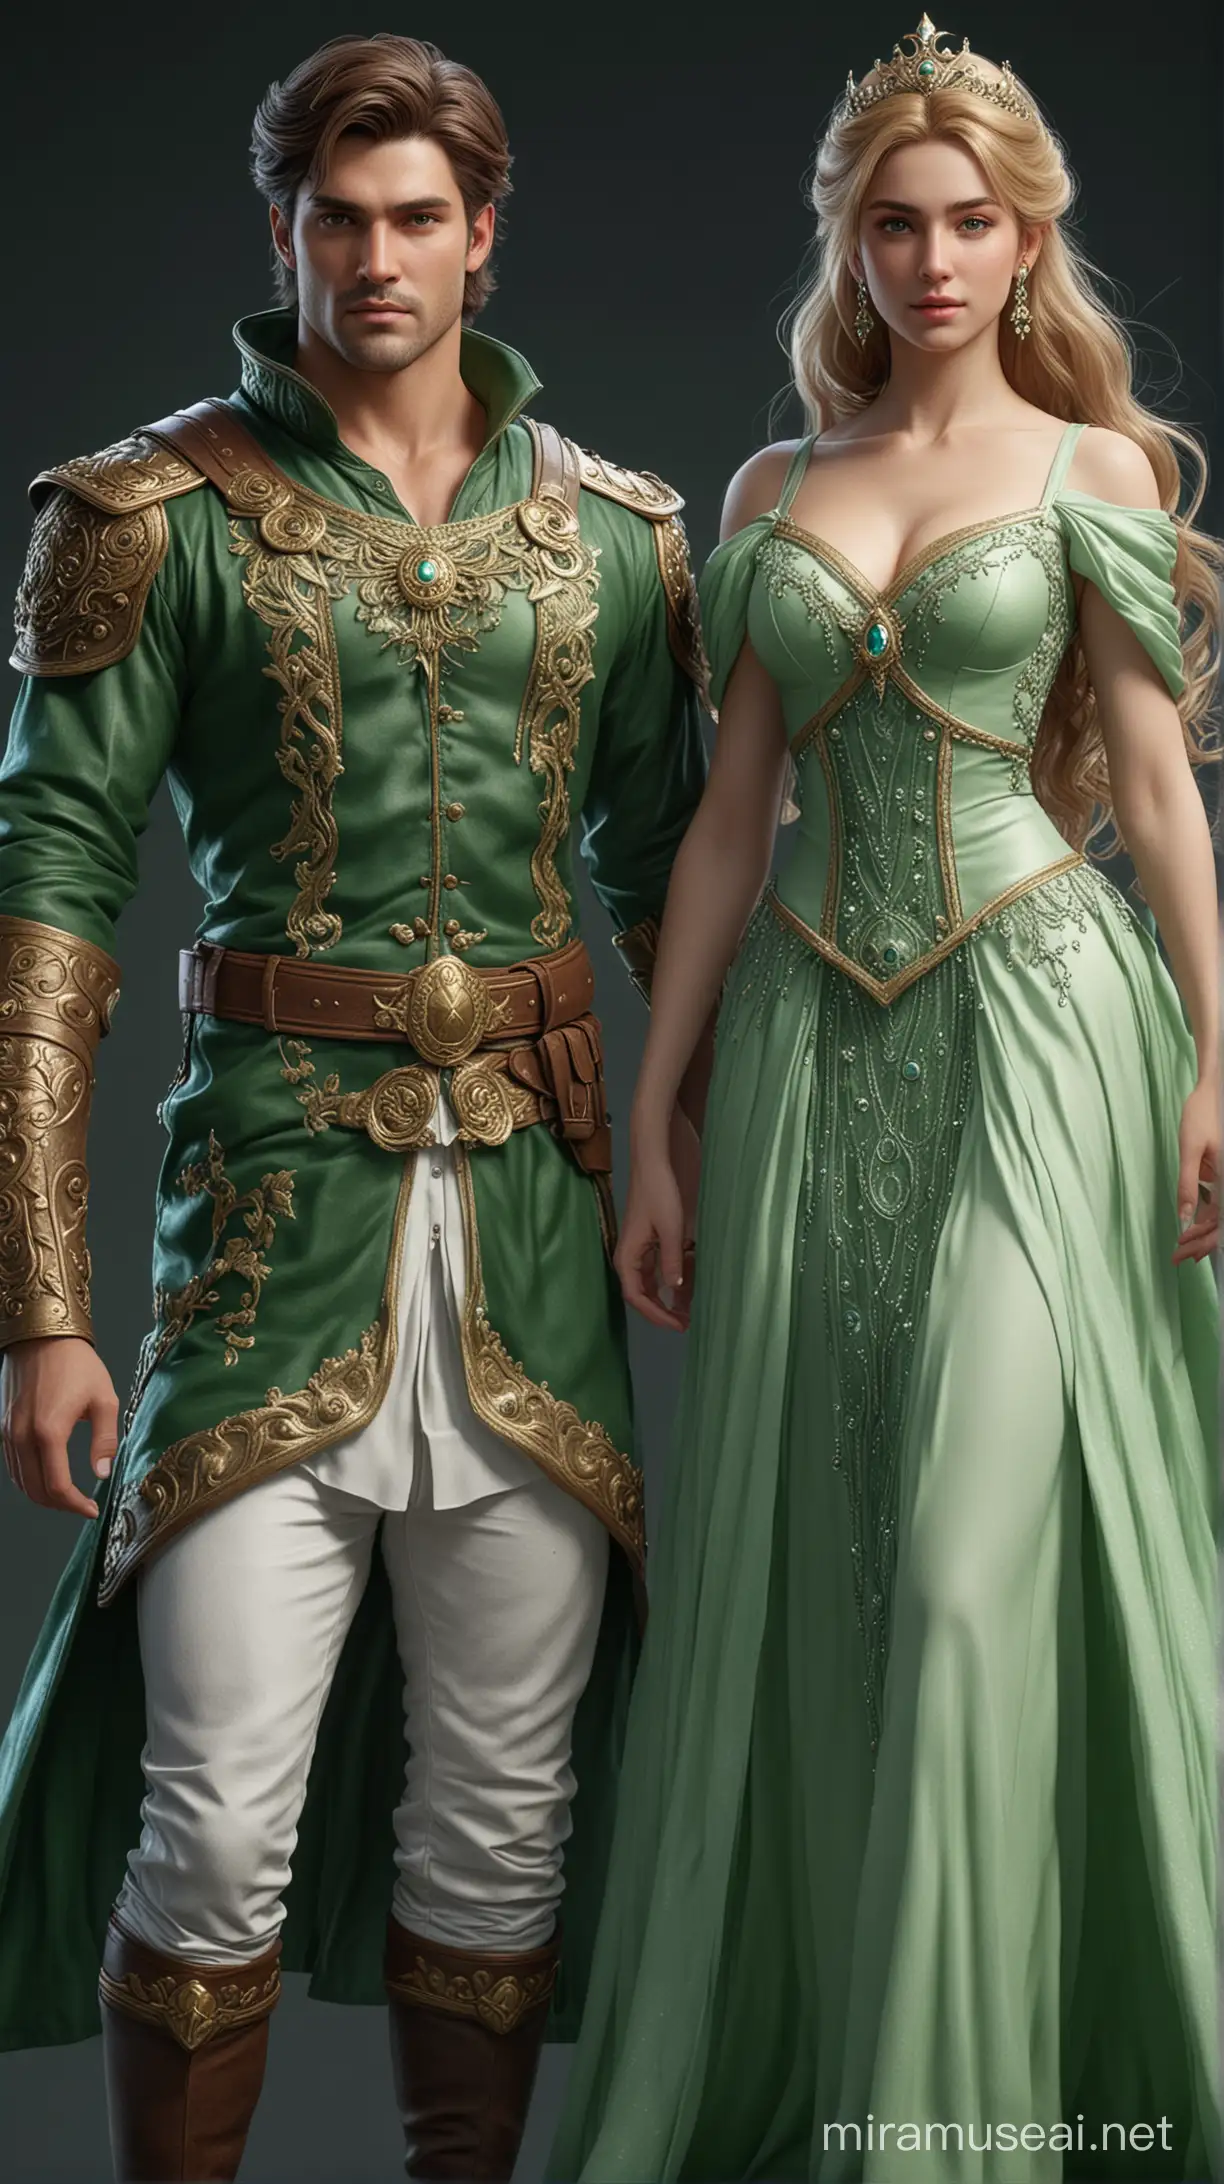 Handsome Hunky Celestial Prince and Beautiful Princess in Green Attire Detailed Realistic Digital Art